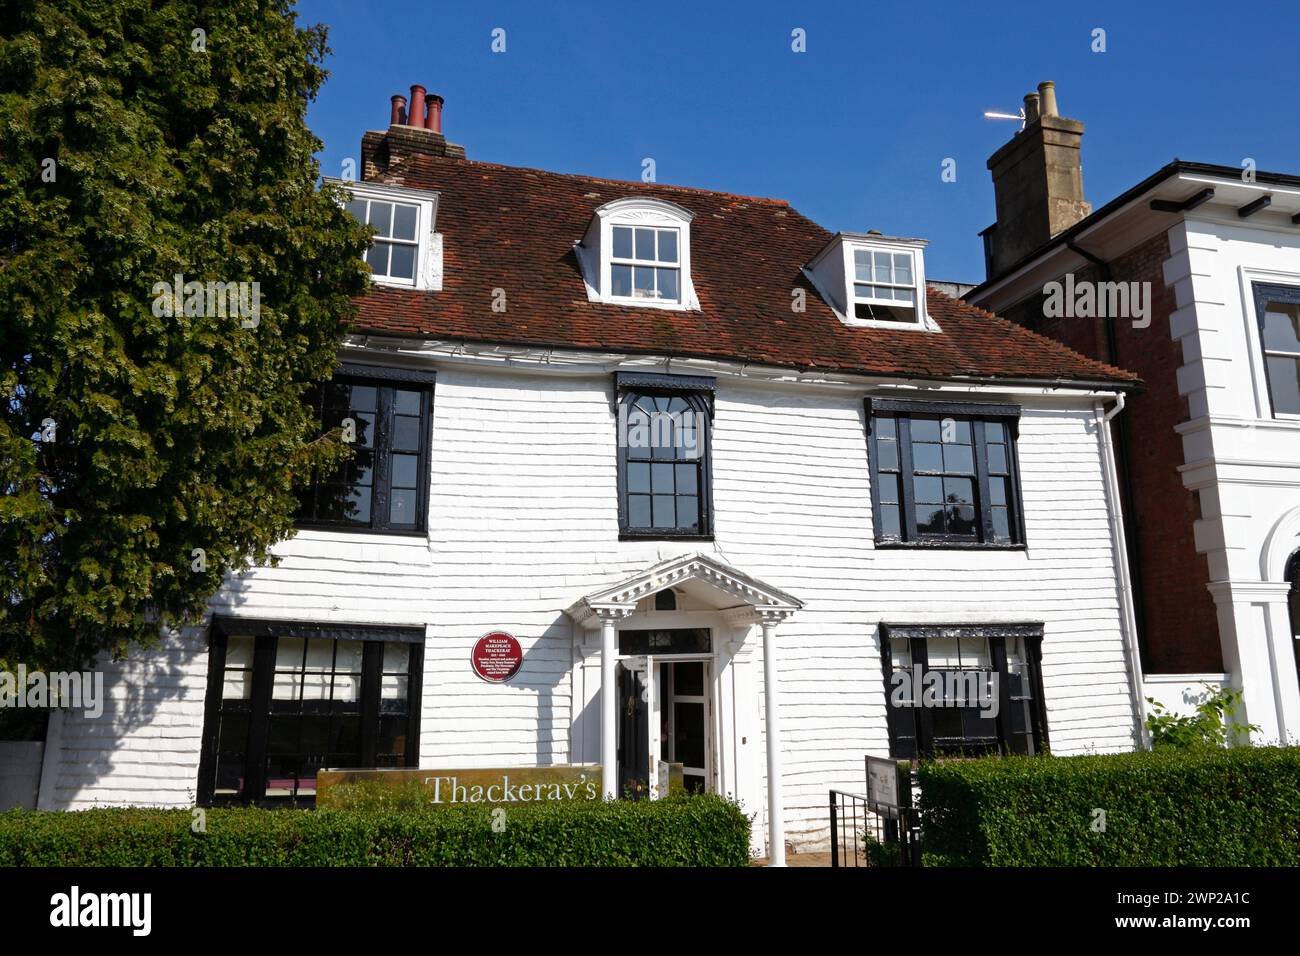 Thackeray's restaurant, a typical Kentish style building with white painted weatherboards, Tunbridge Wells, Kent, England Stock Photo